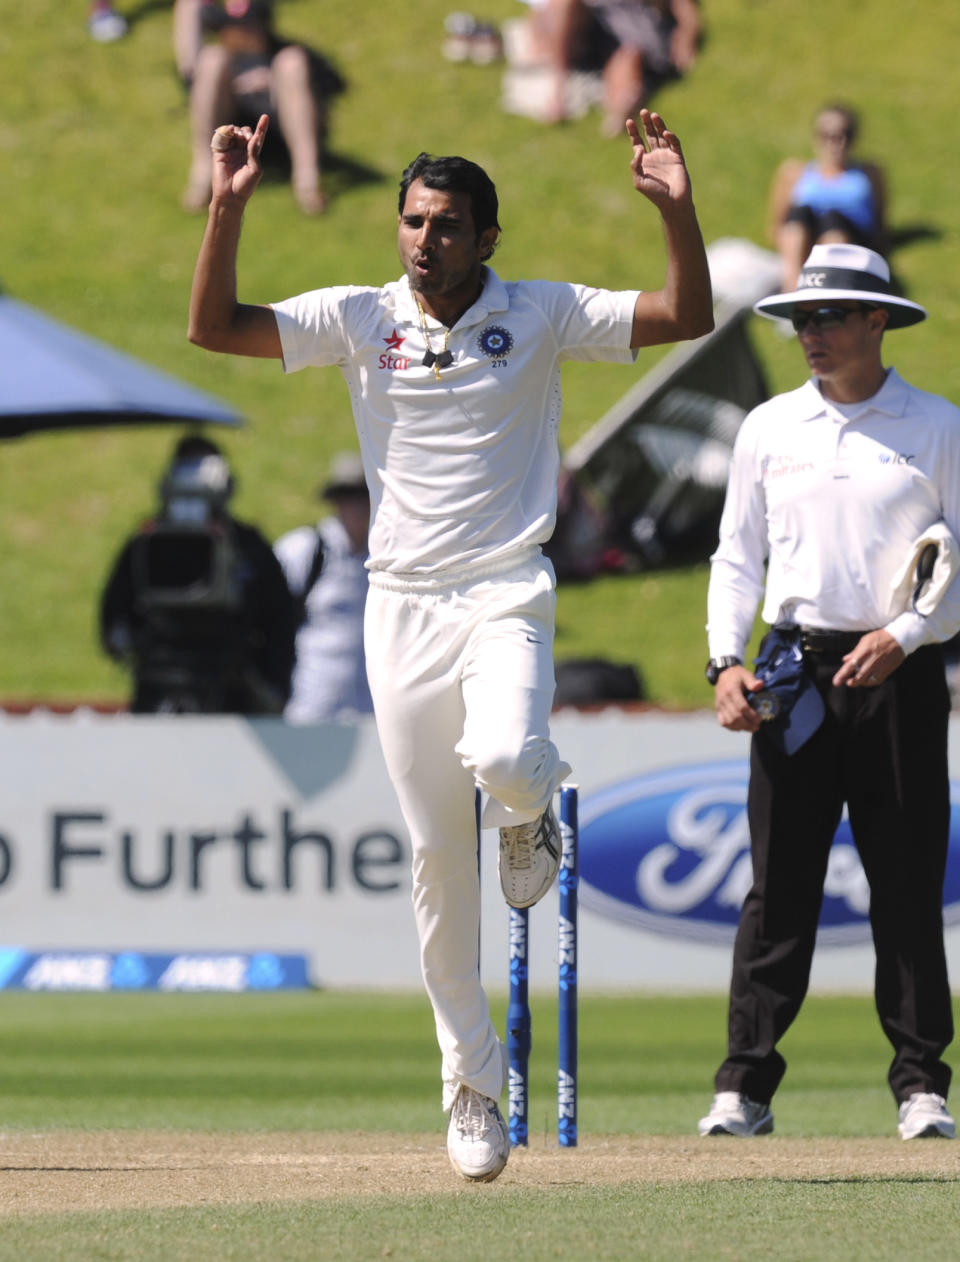 India’s Mohammed Shami reacts bowling against New Zealand on the fourth day of the second cricket test at Basin Reserve in Wellington, New Zealand, Monday, Feb. 17, 2014. (AP Photo/SNPA, Ross Setford) NEW ZEALAND OUT